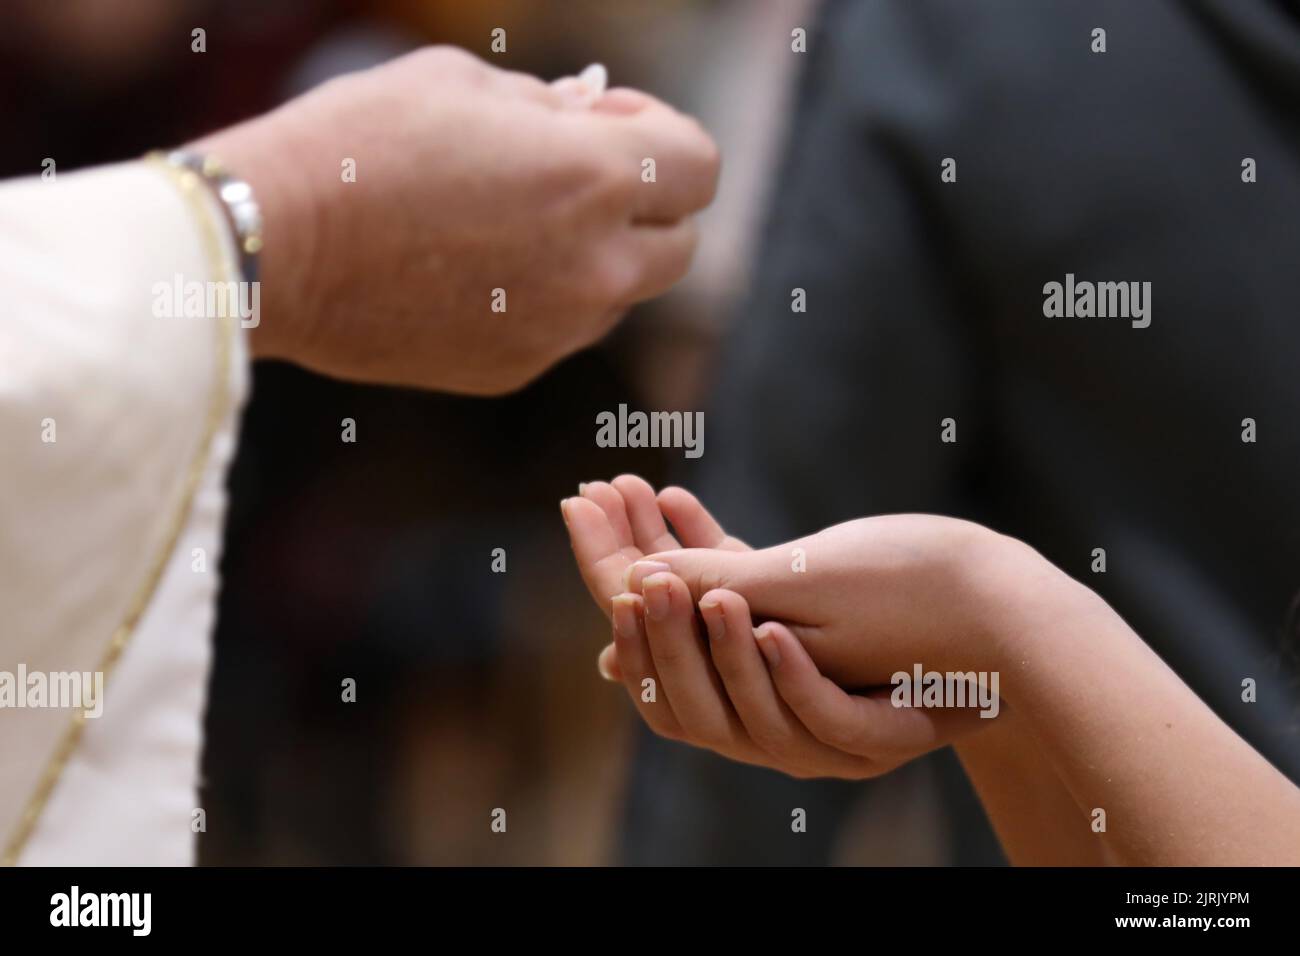 Hands of a parishioner clasped together about to recieve the host or bread from a priest at a cathlolic mass or communion liturgy or mass. Stock Photo